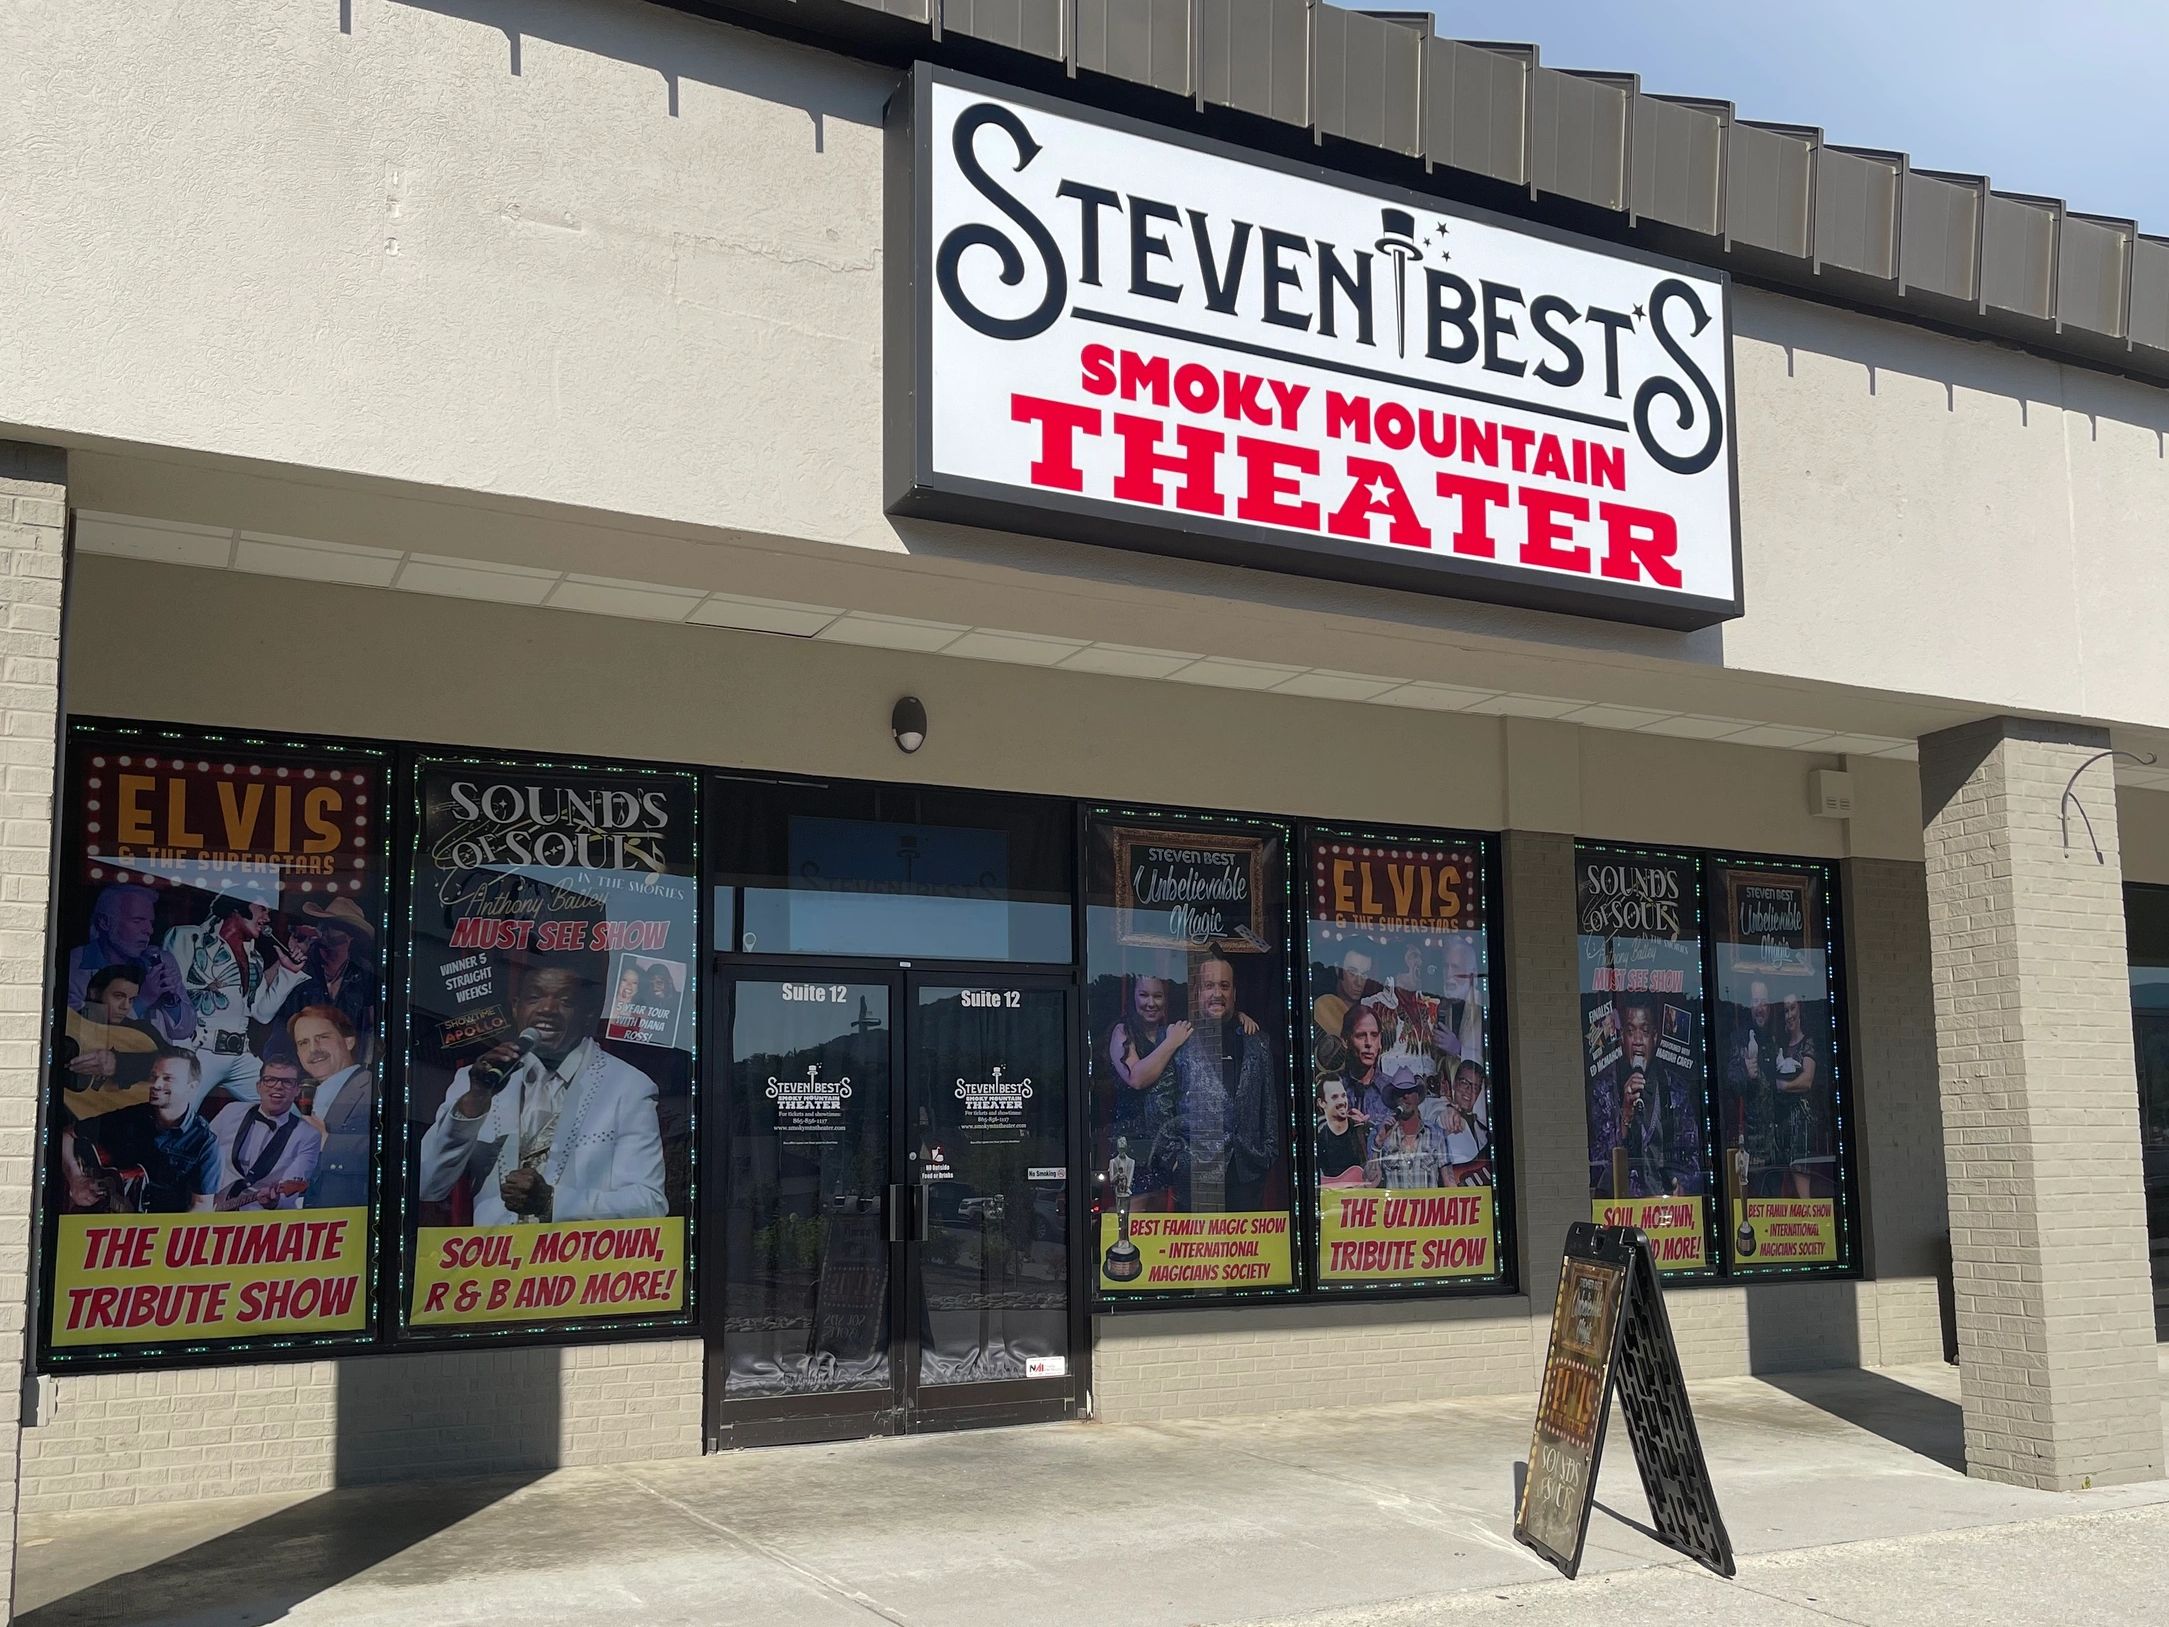 Pigeon Forge shows at Steven Best’s Smoky Mountain Theater 